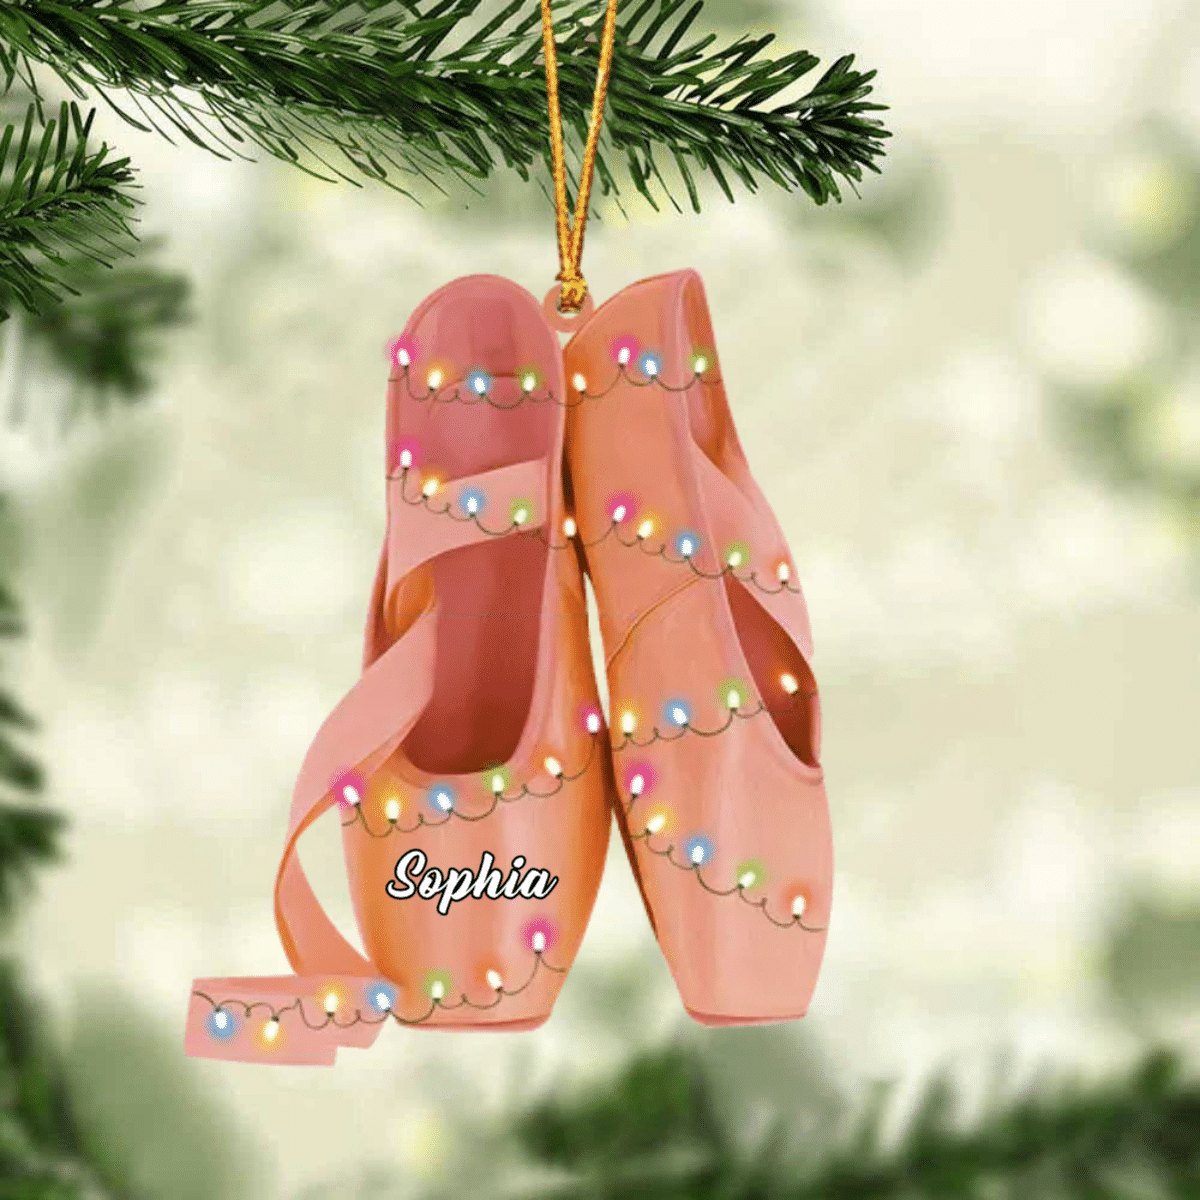 Ballet Pointe Shoes With Christmas Light - Personalized Christmas Ornament - Gift For Ballet Dancers